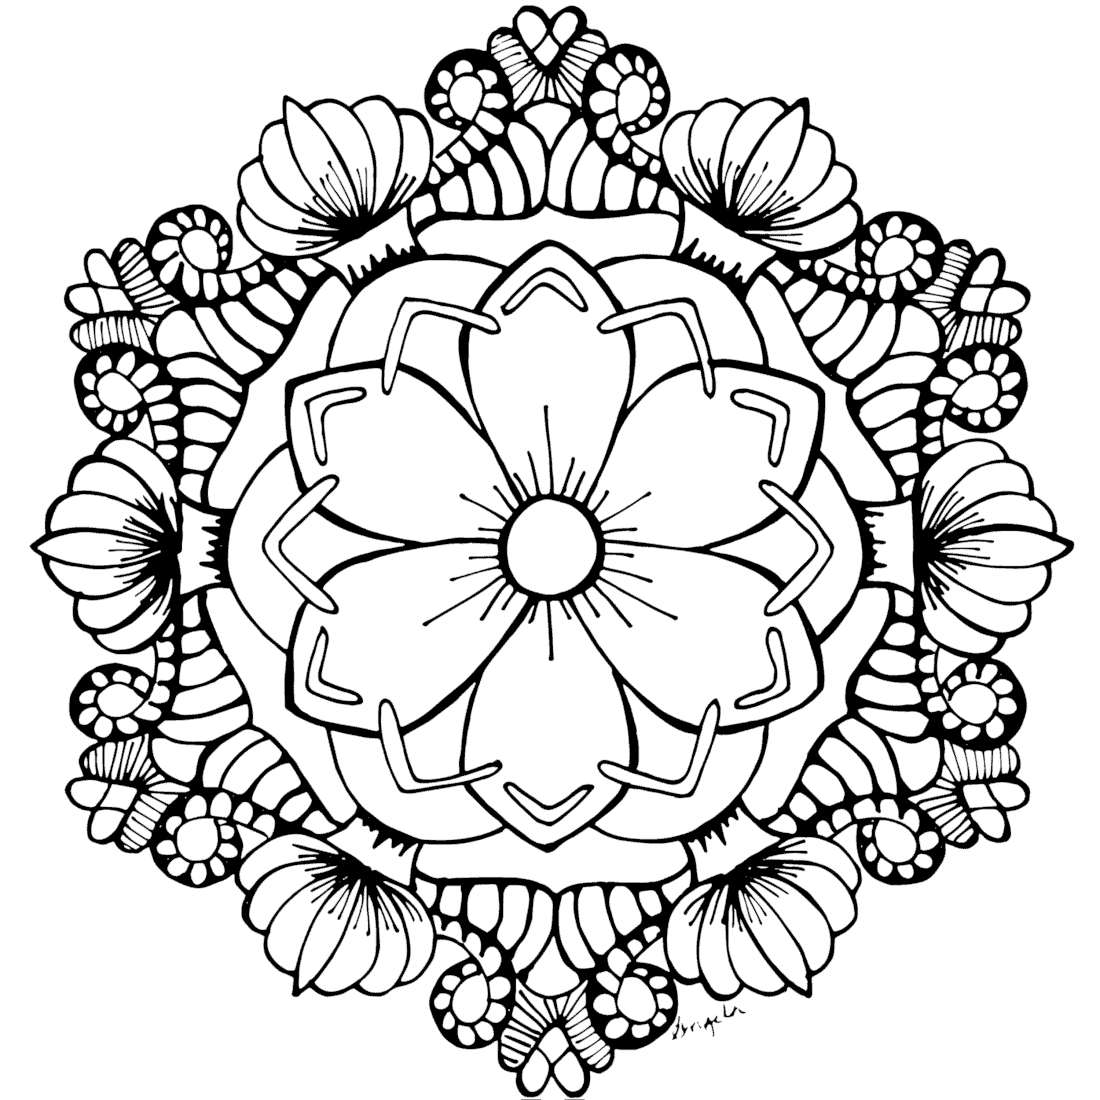 Free Coloring Pages For You To Print - Monday Mandala for Free Mandalas To Colour In Printable